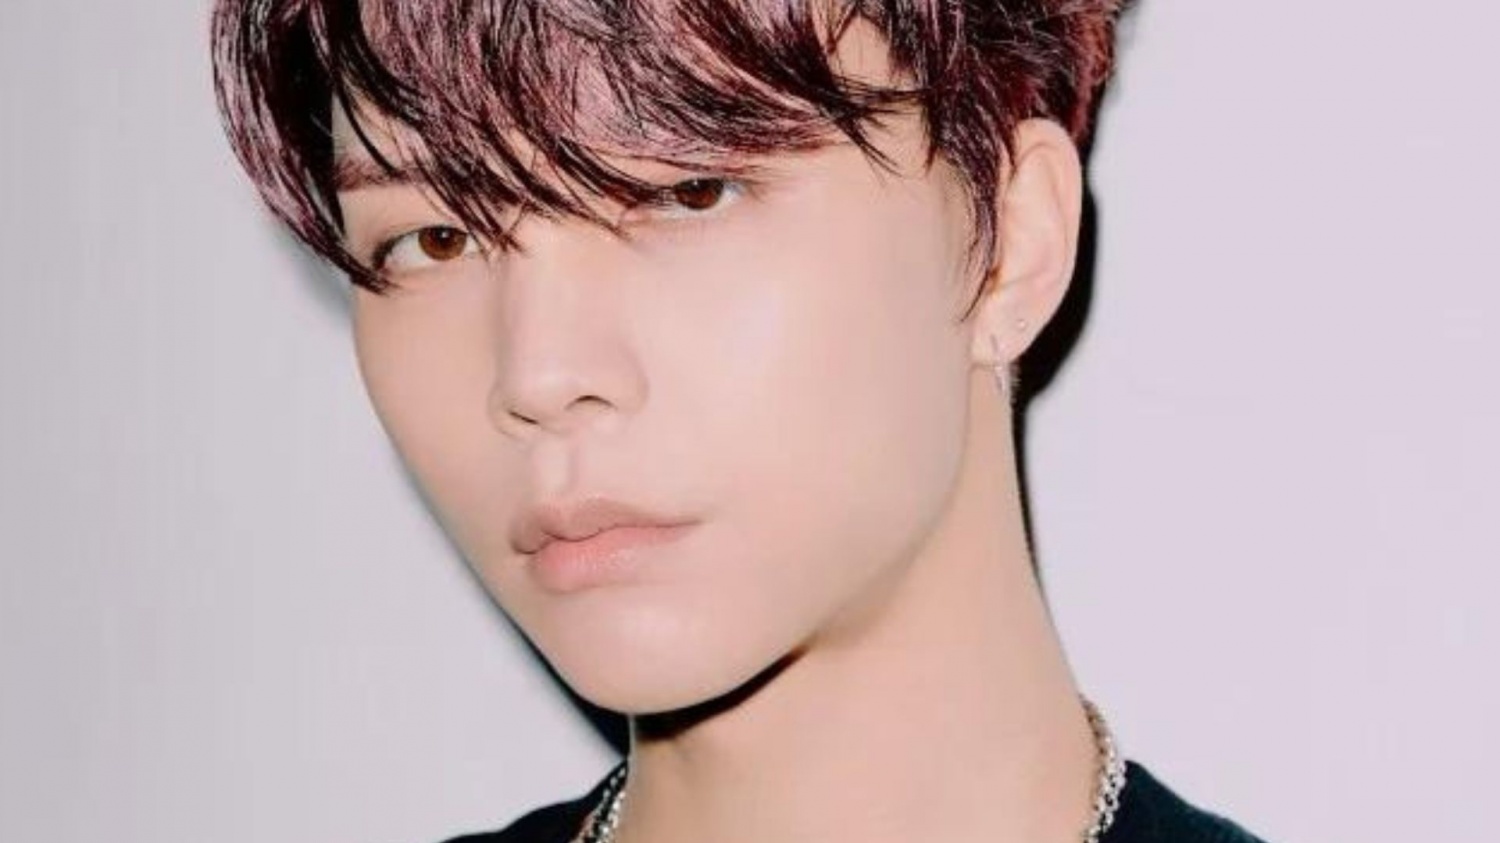 Did NCT Johnny Just Spill the Tea?His Unexpected Comment on Fans’ Dislike of SM Entertainment Revealed